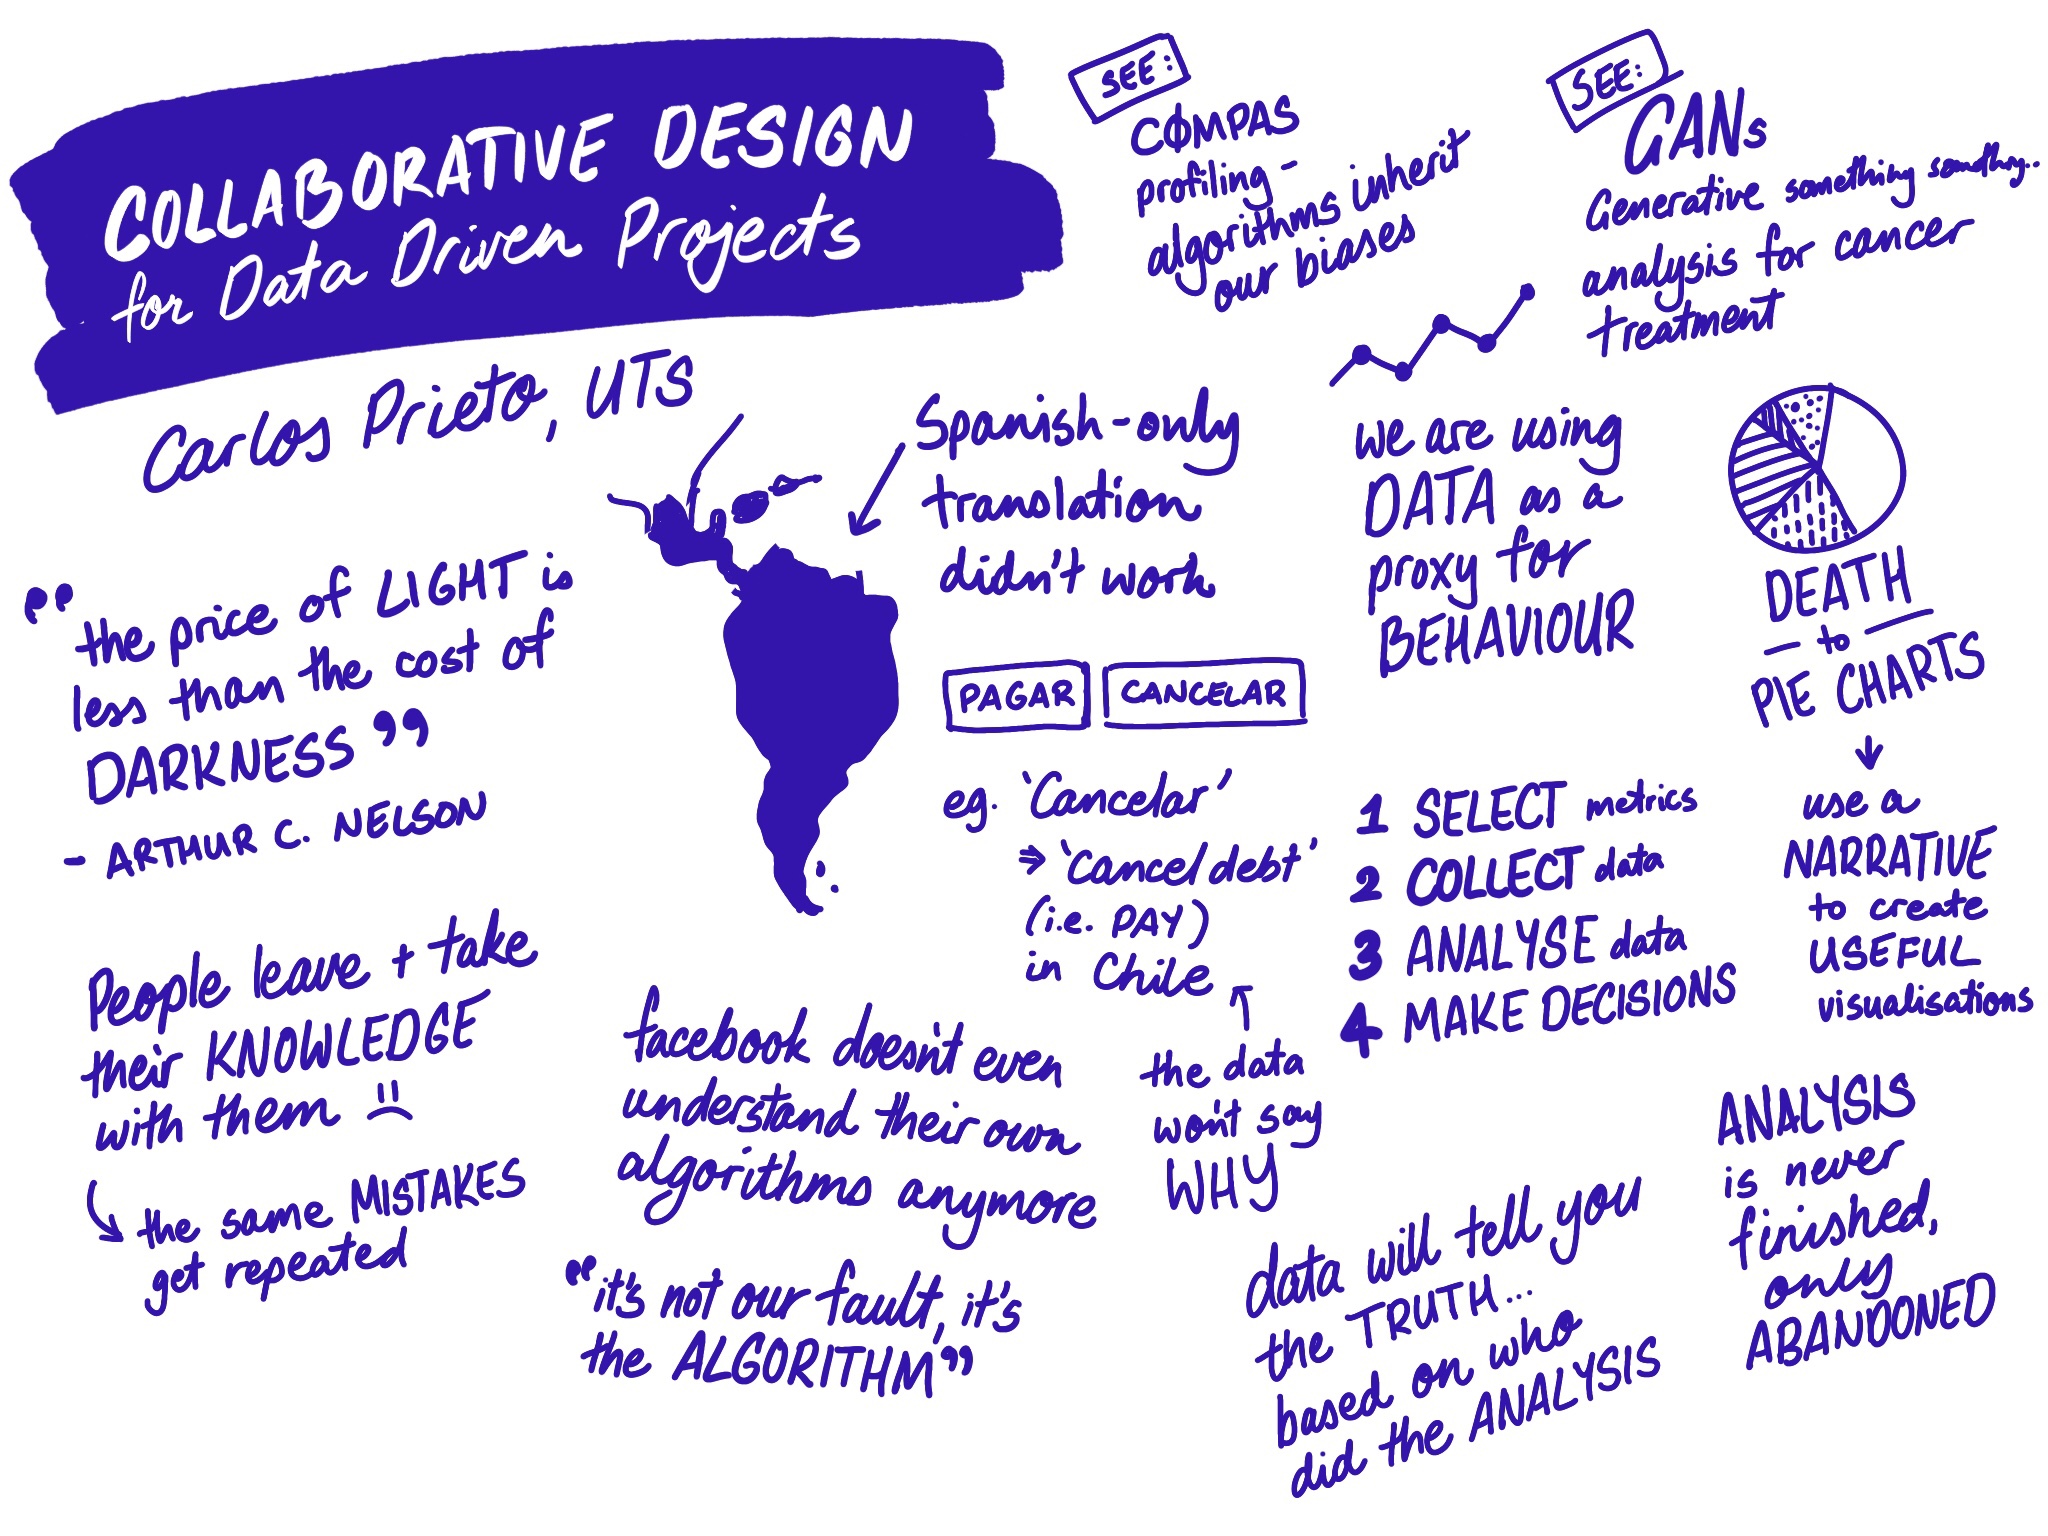 assets/sketching/img_1810.jpg|sketchnote: collaborative design for data driven projects